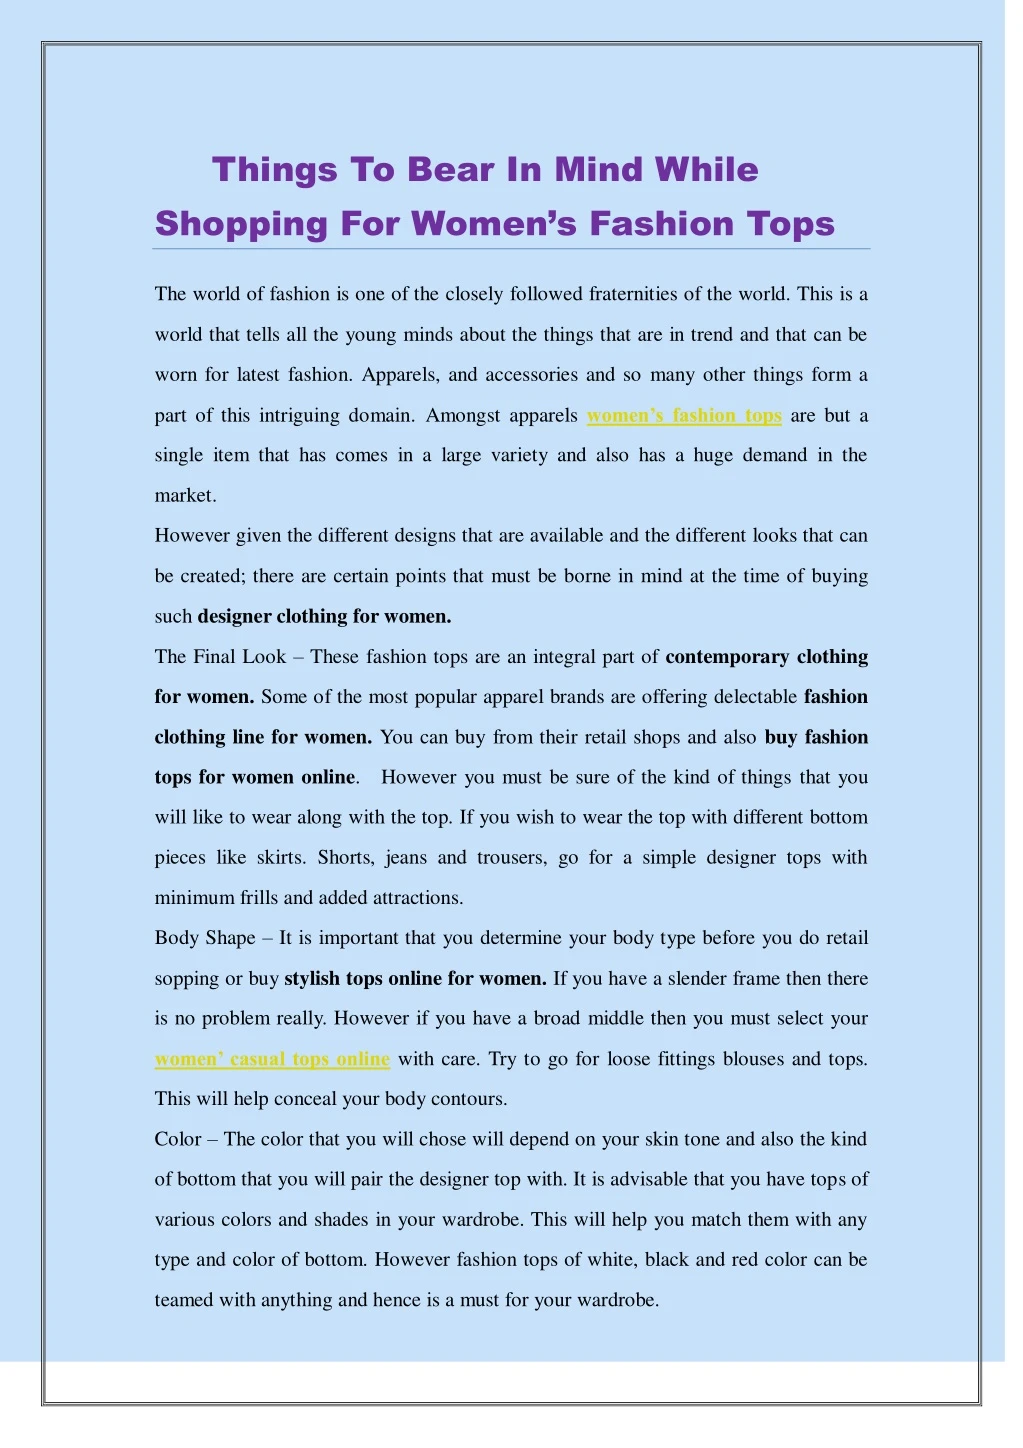 things to bear in mind while shopping for women